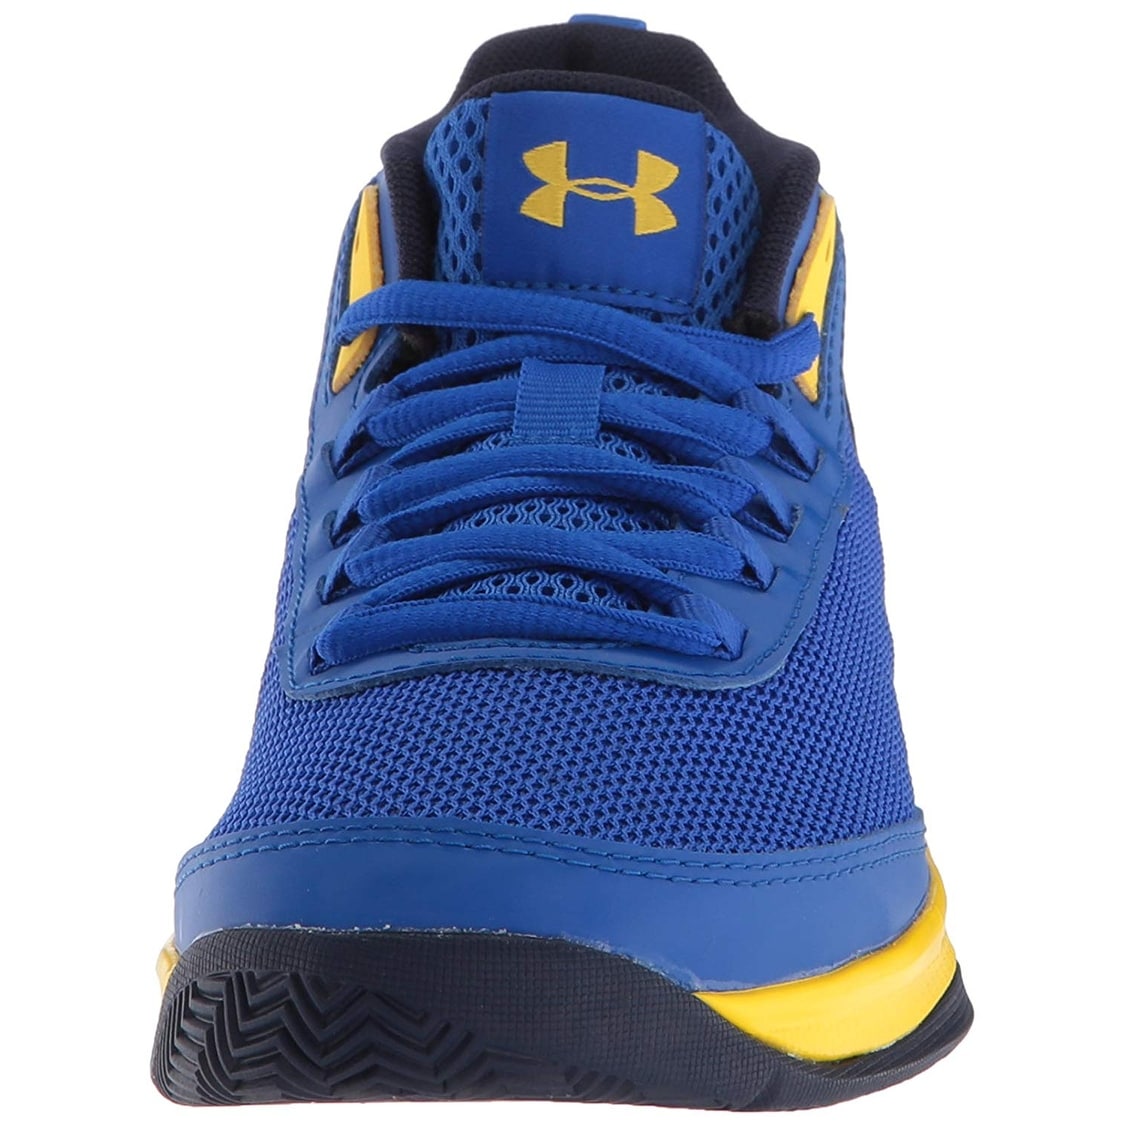 under armour jet 2018 basketball shoes